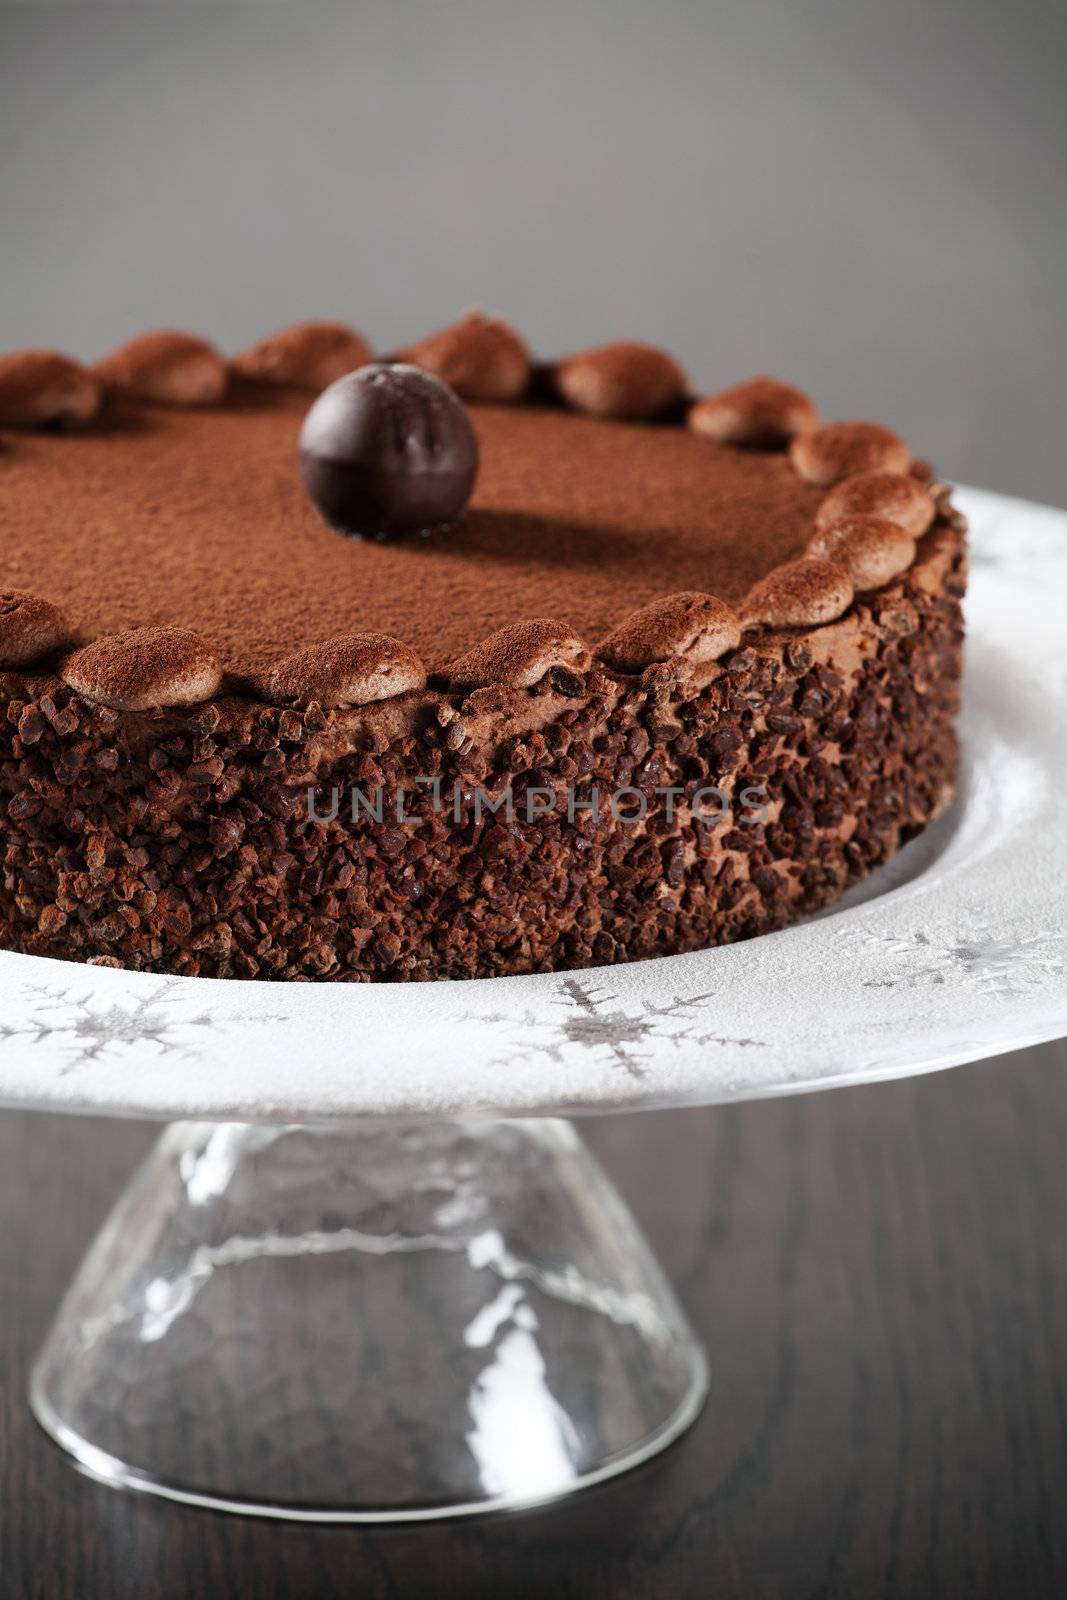 Delicious chocolate cake by sumners